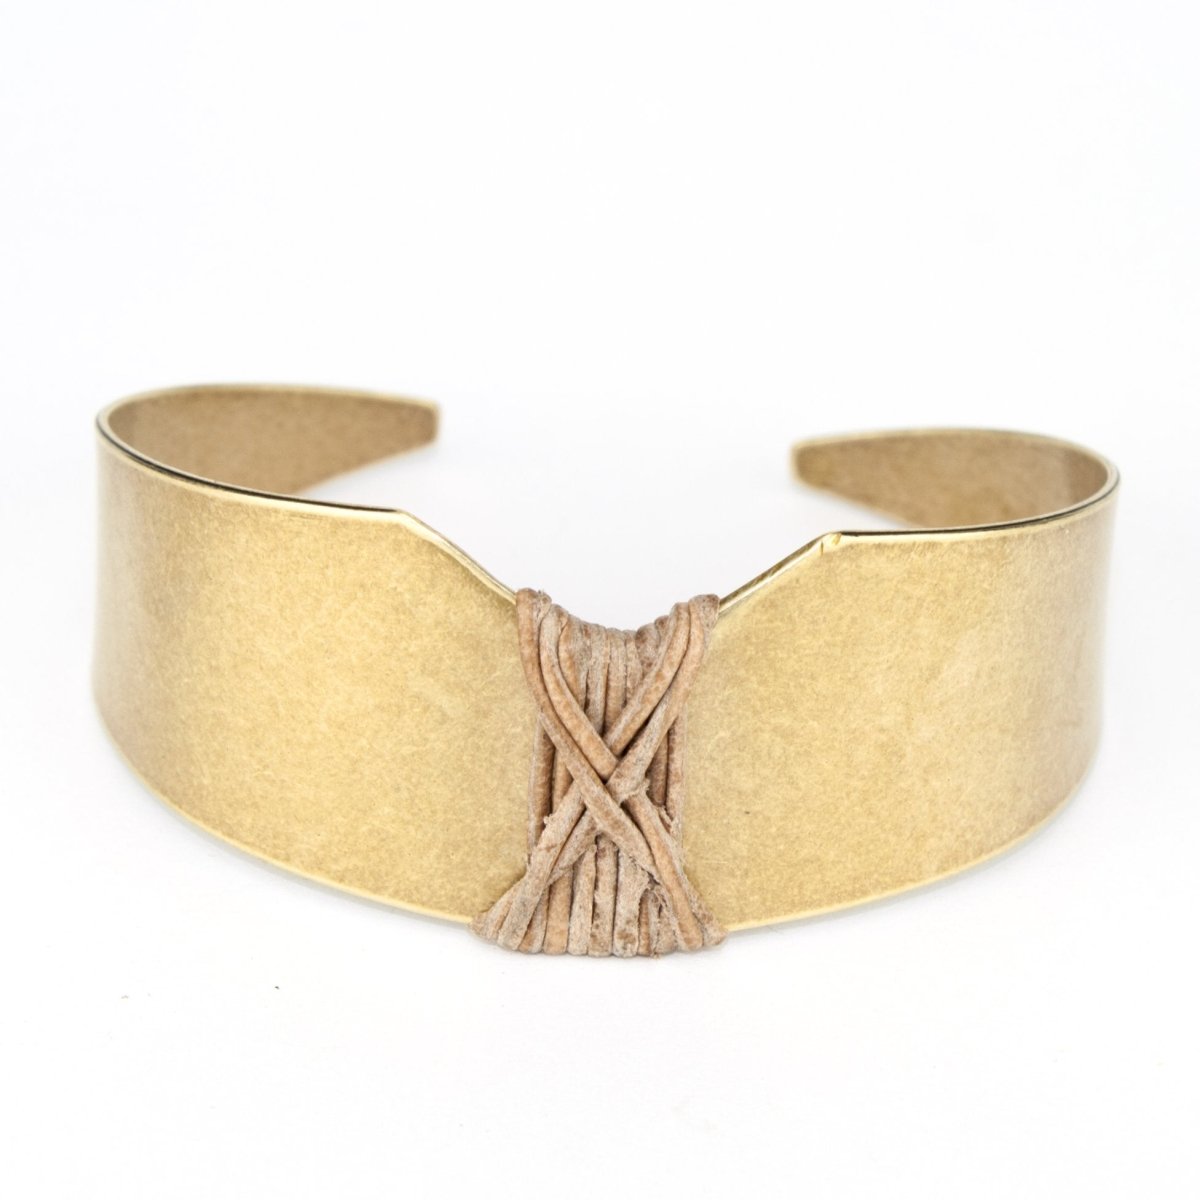 betsy & iya Arch's Shadow cuff bracelet with natural leather.